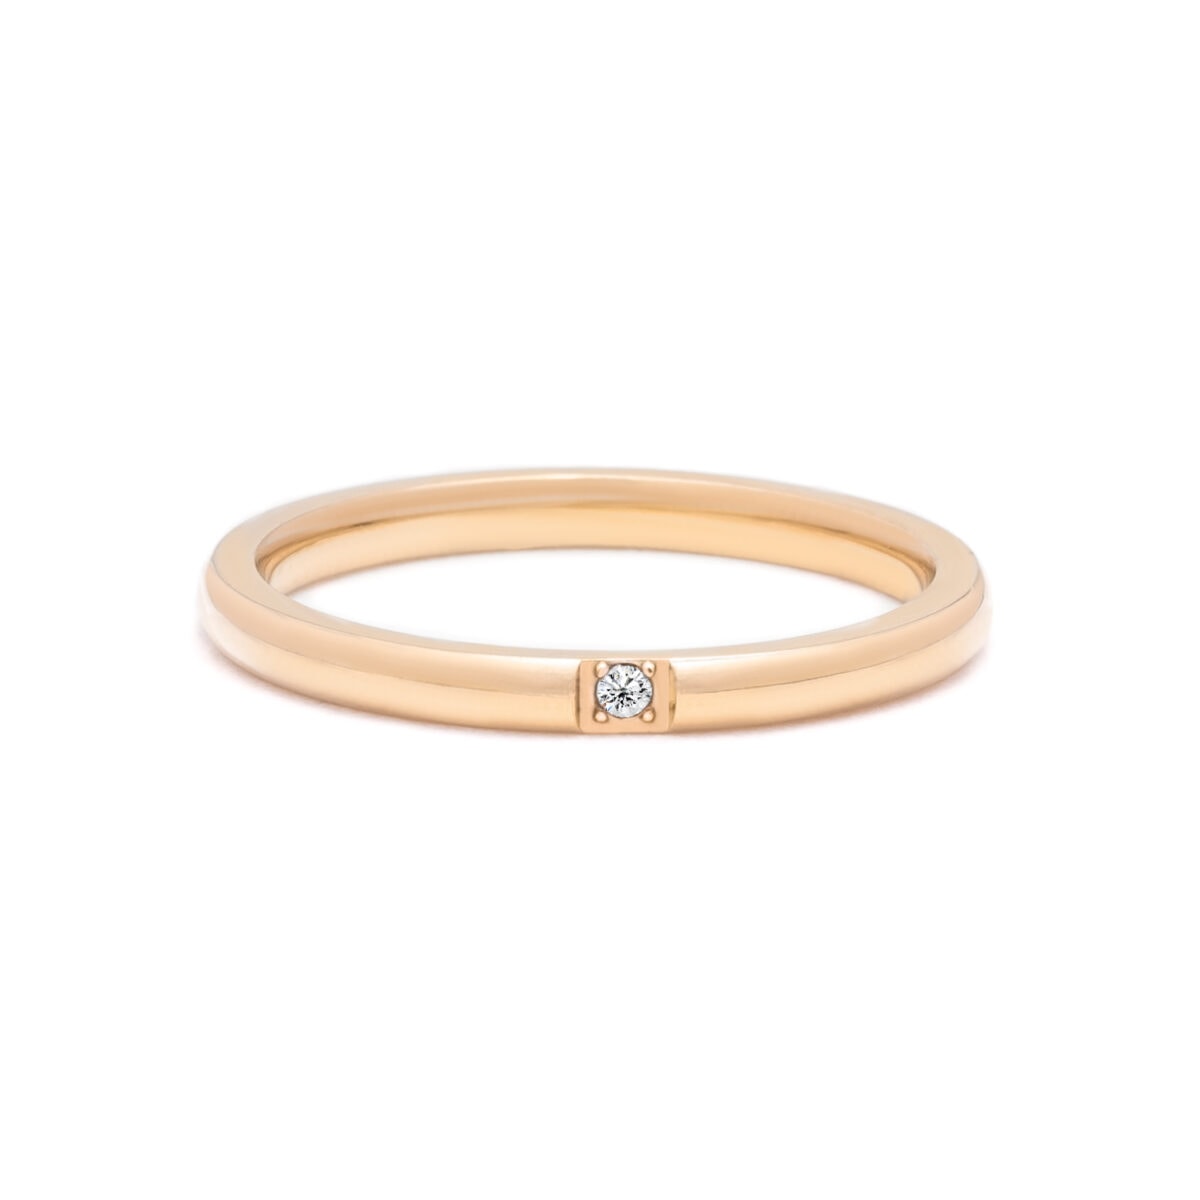 https://m.clubbella.co/product/spark-solitaire-minimal-ring/ Spark solitaire Minimal RIng (2)